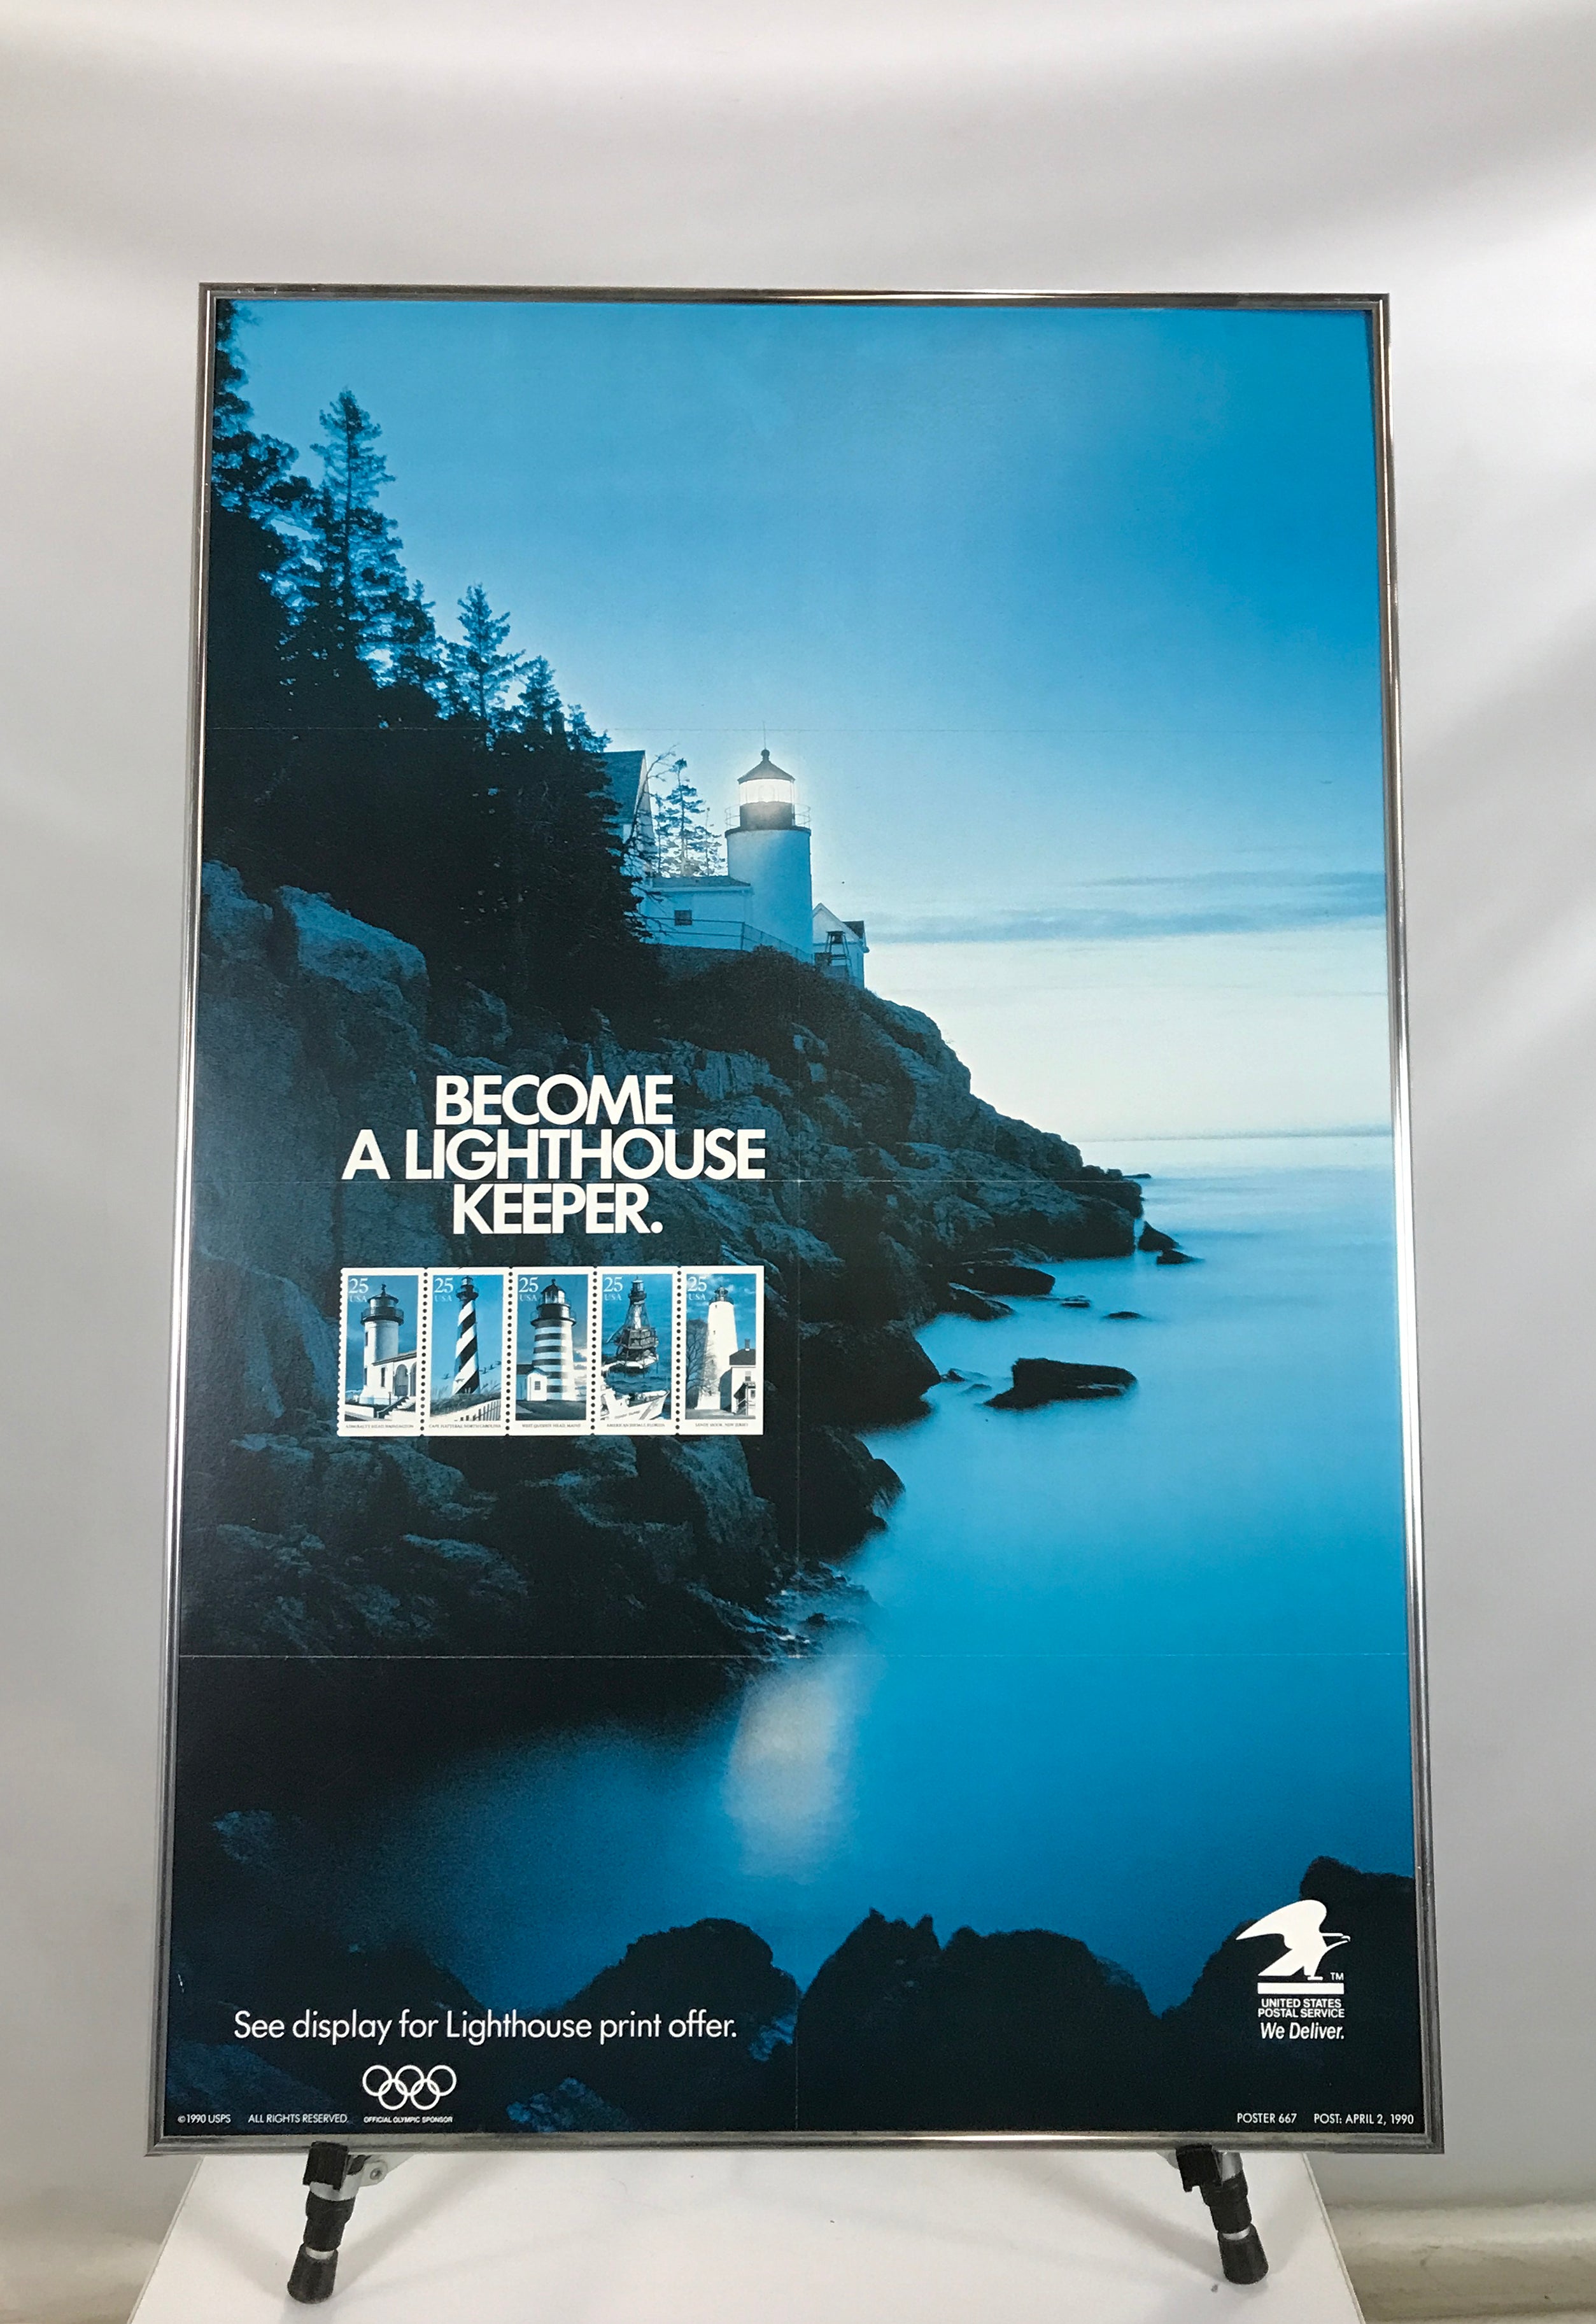 "Become a Lighthouse Keeper" United States Postal Service Poster